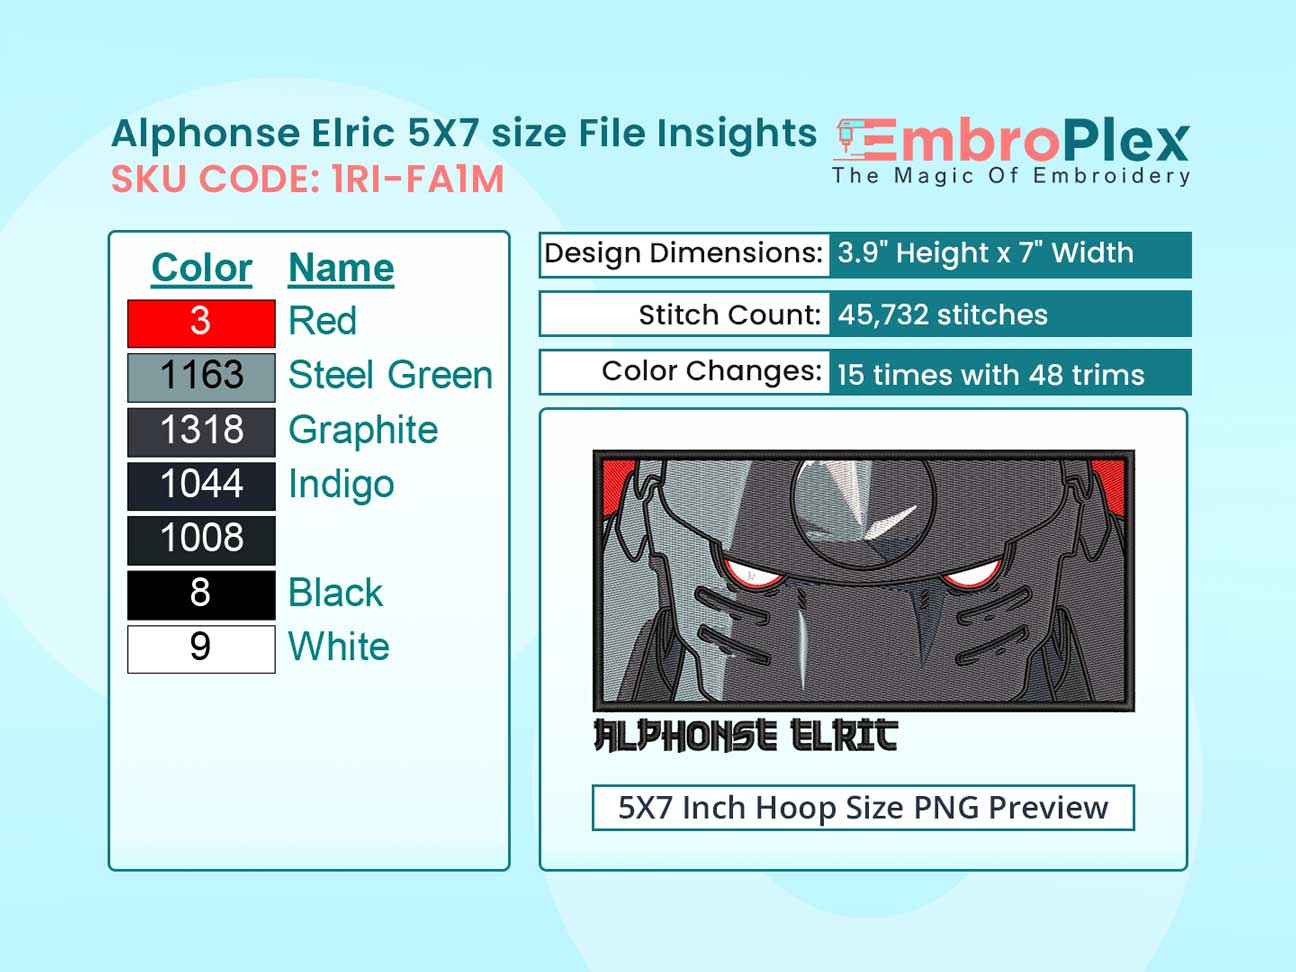 Anime-Inspired Alphonse Elric Embroidery Design File - 5x7 Inch hoop Size Variation overview image